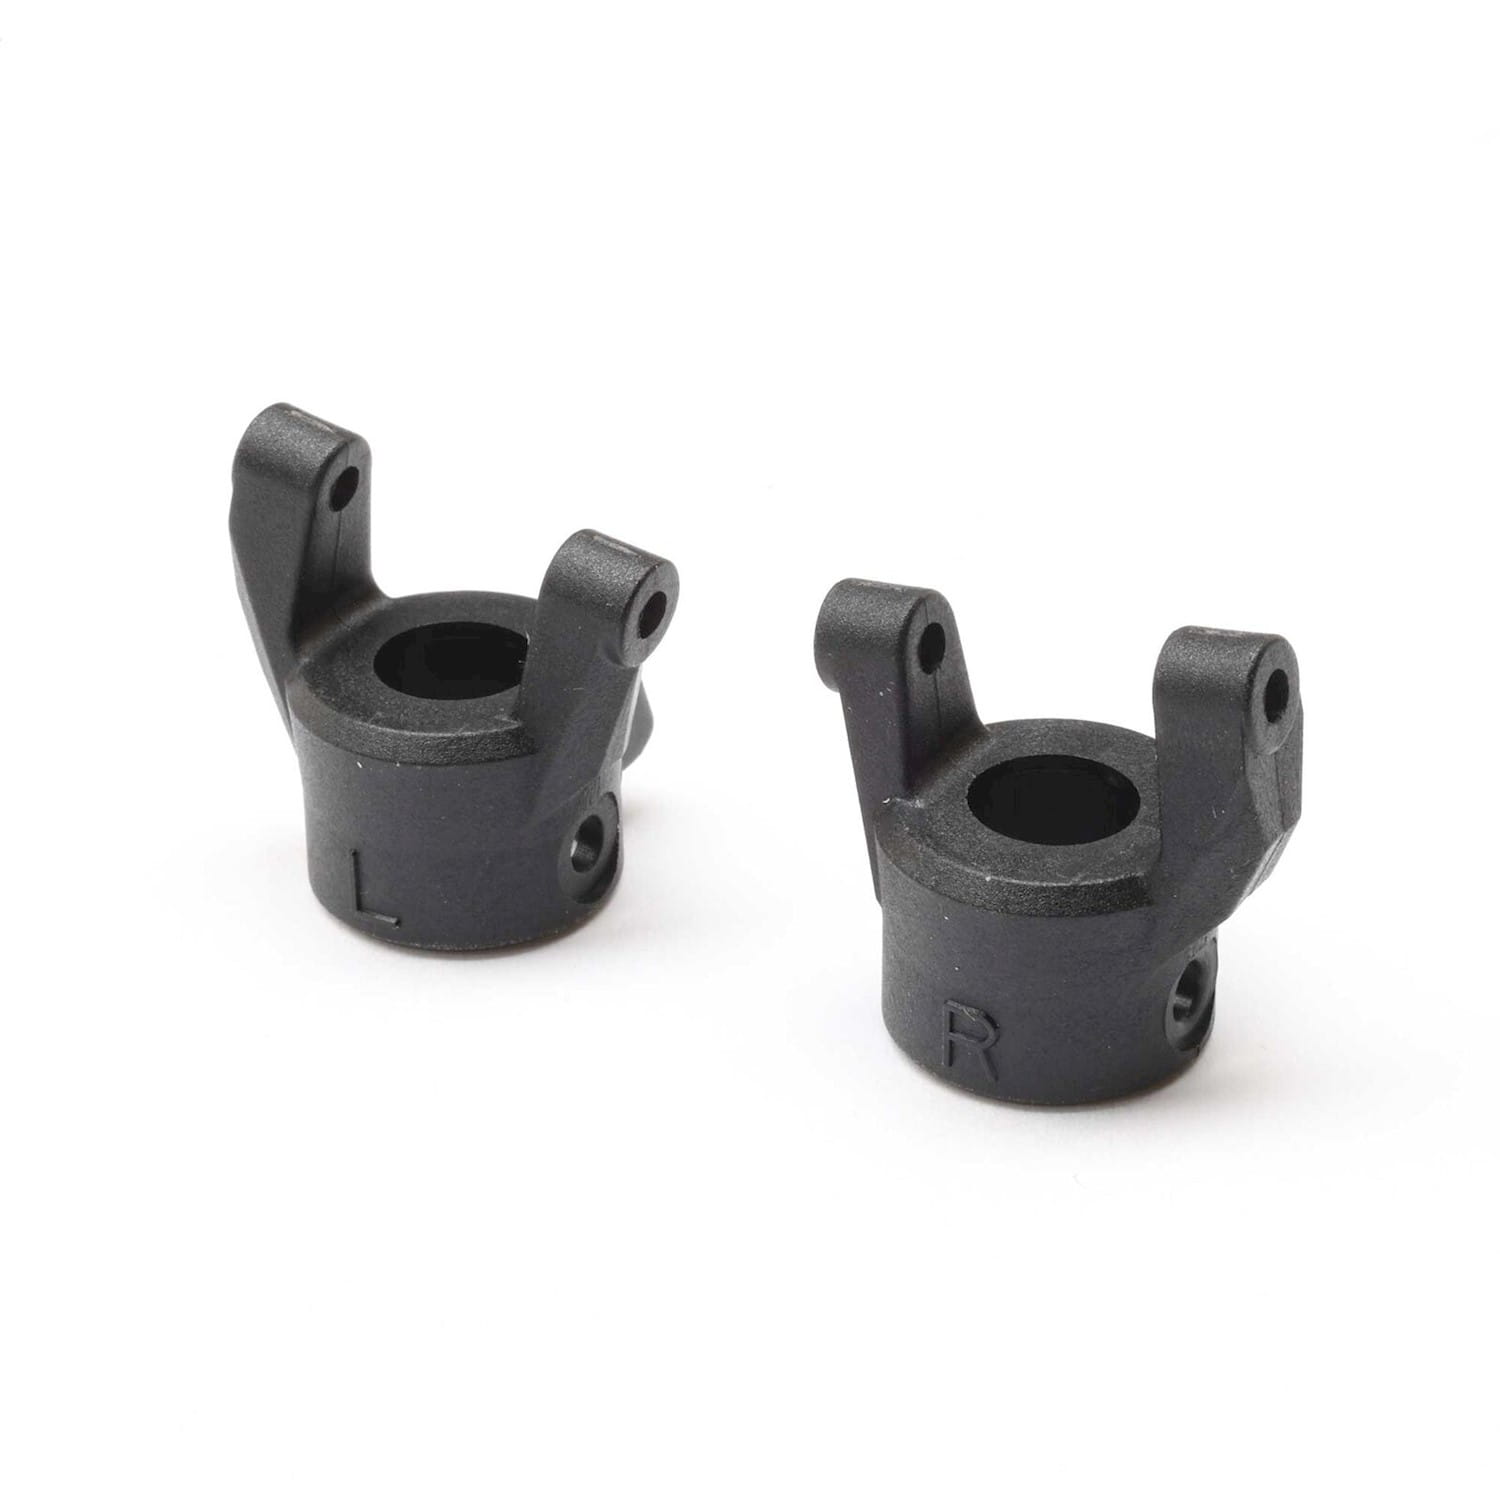 Axial C Hub Carrier Set: PRO